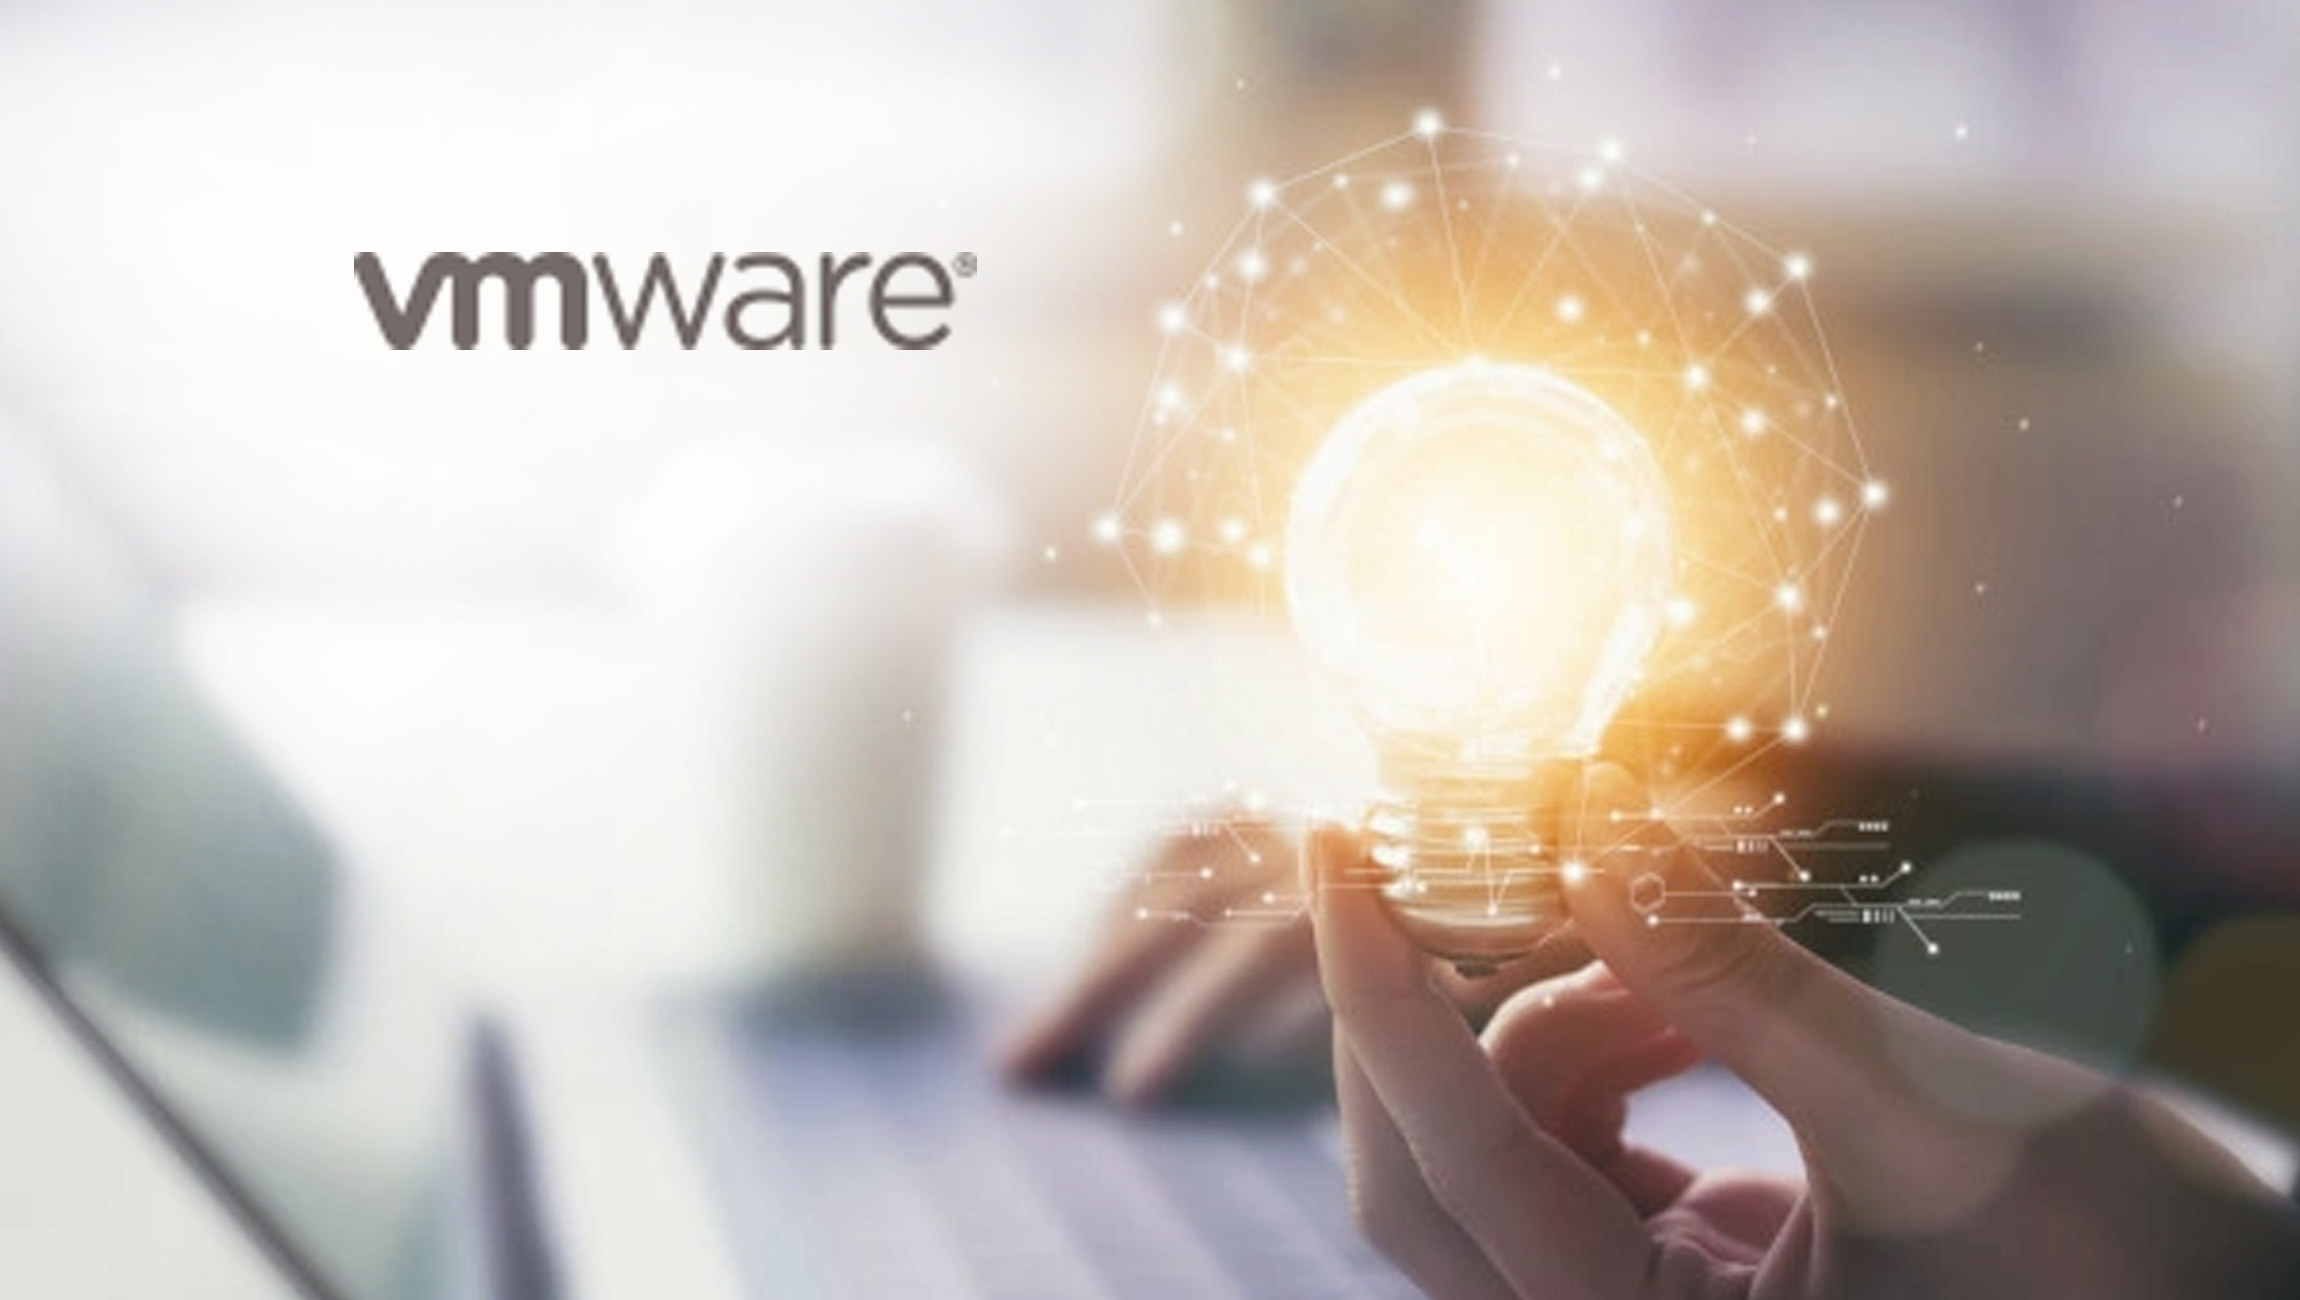 VMware Named a Leader in the 2021 Gartner Magic Quadrant for Unified Endpoint Management for Fourth Year in a Row